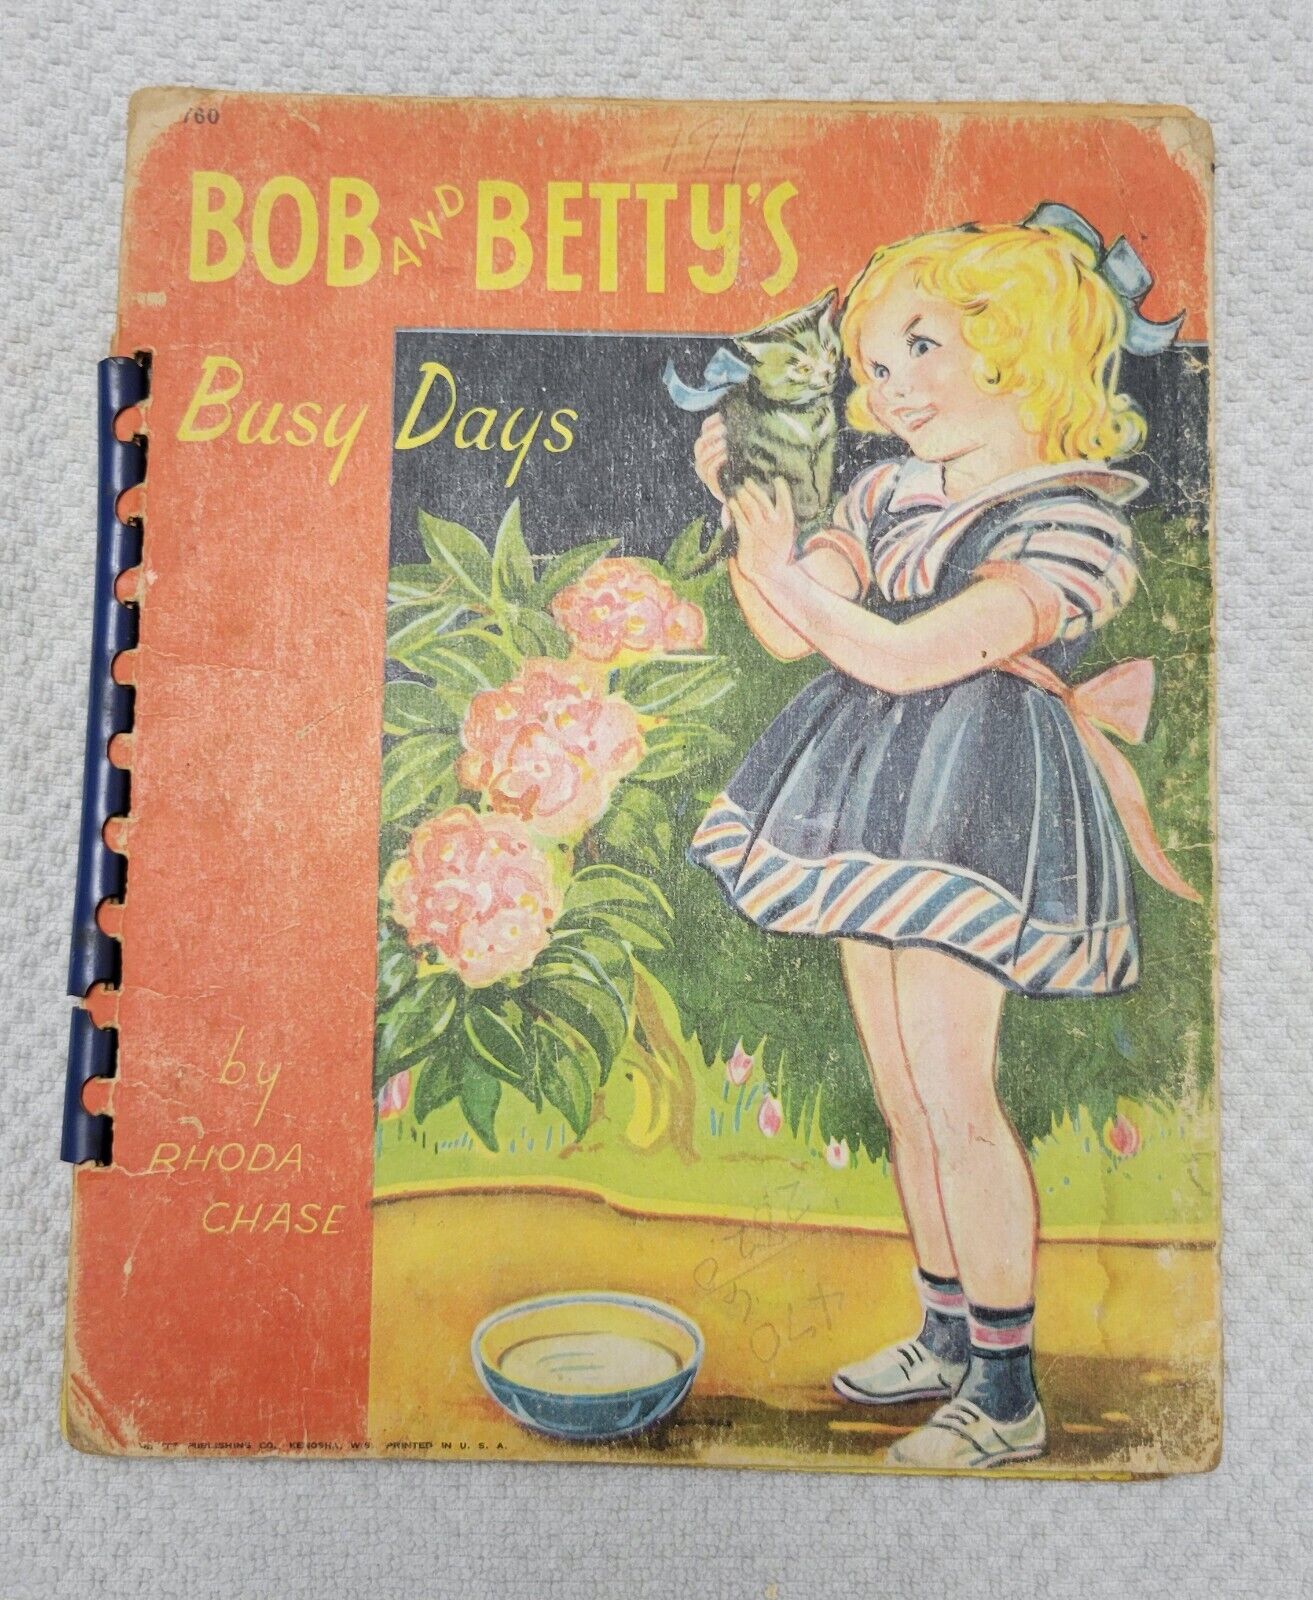 Bob and Betty's Busy Days 1943 Vintage Children's Classic Book